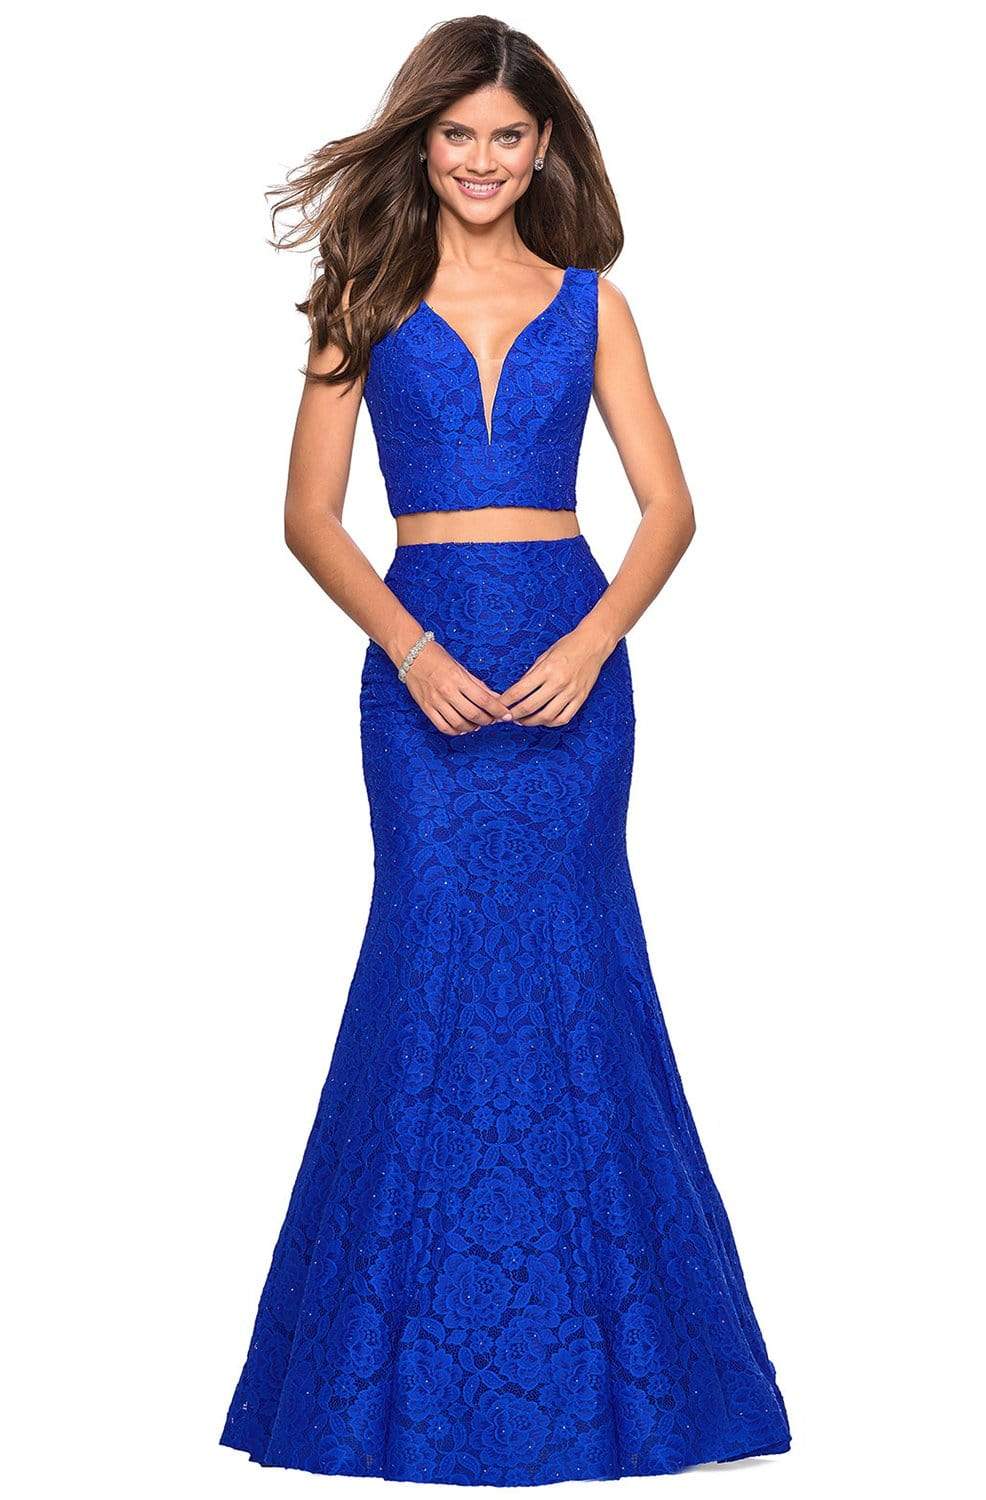 Image of La Femme - 27262 Allover Lace Sleeveless V Neck Two-Piece Mermaid Gown